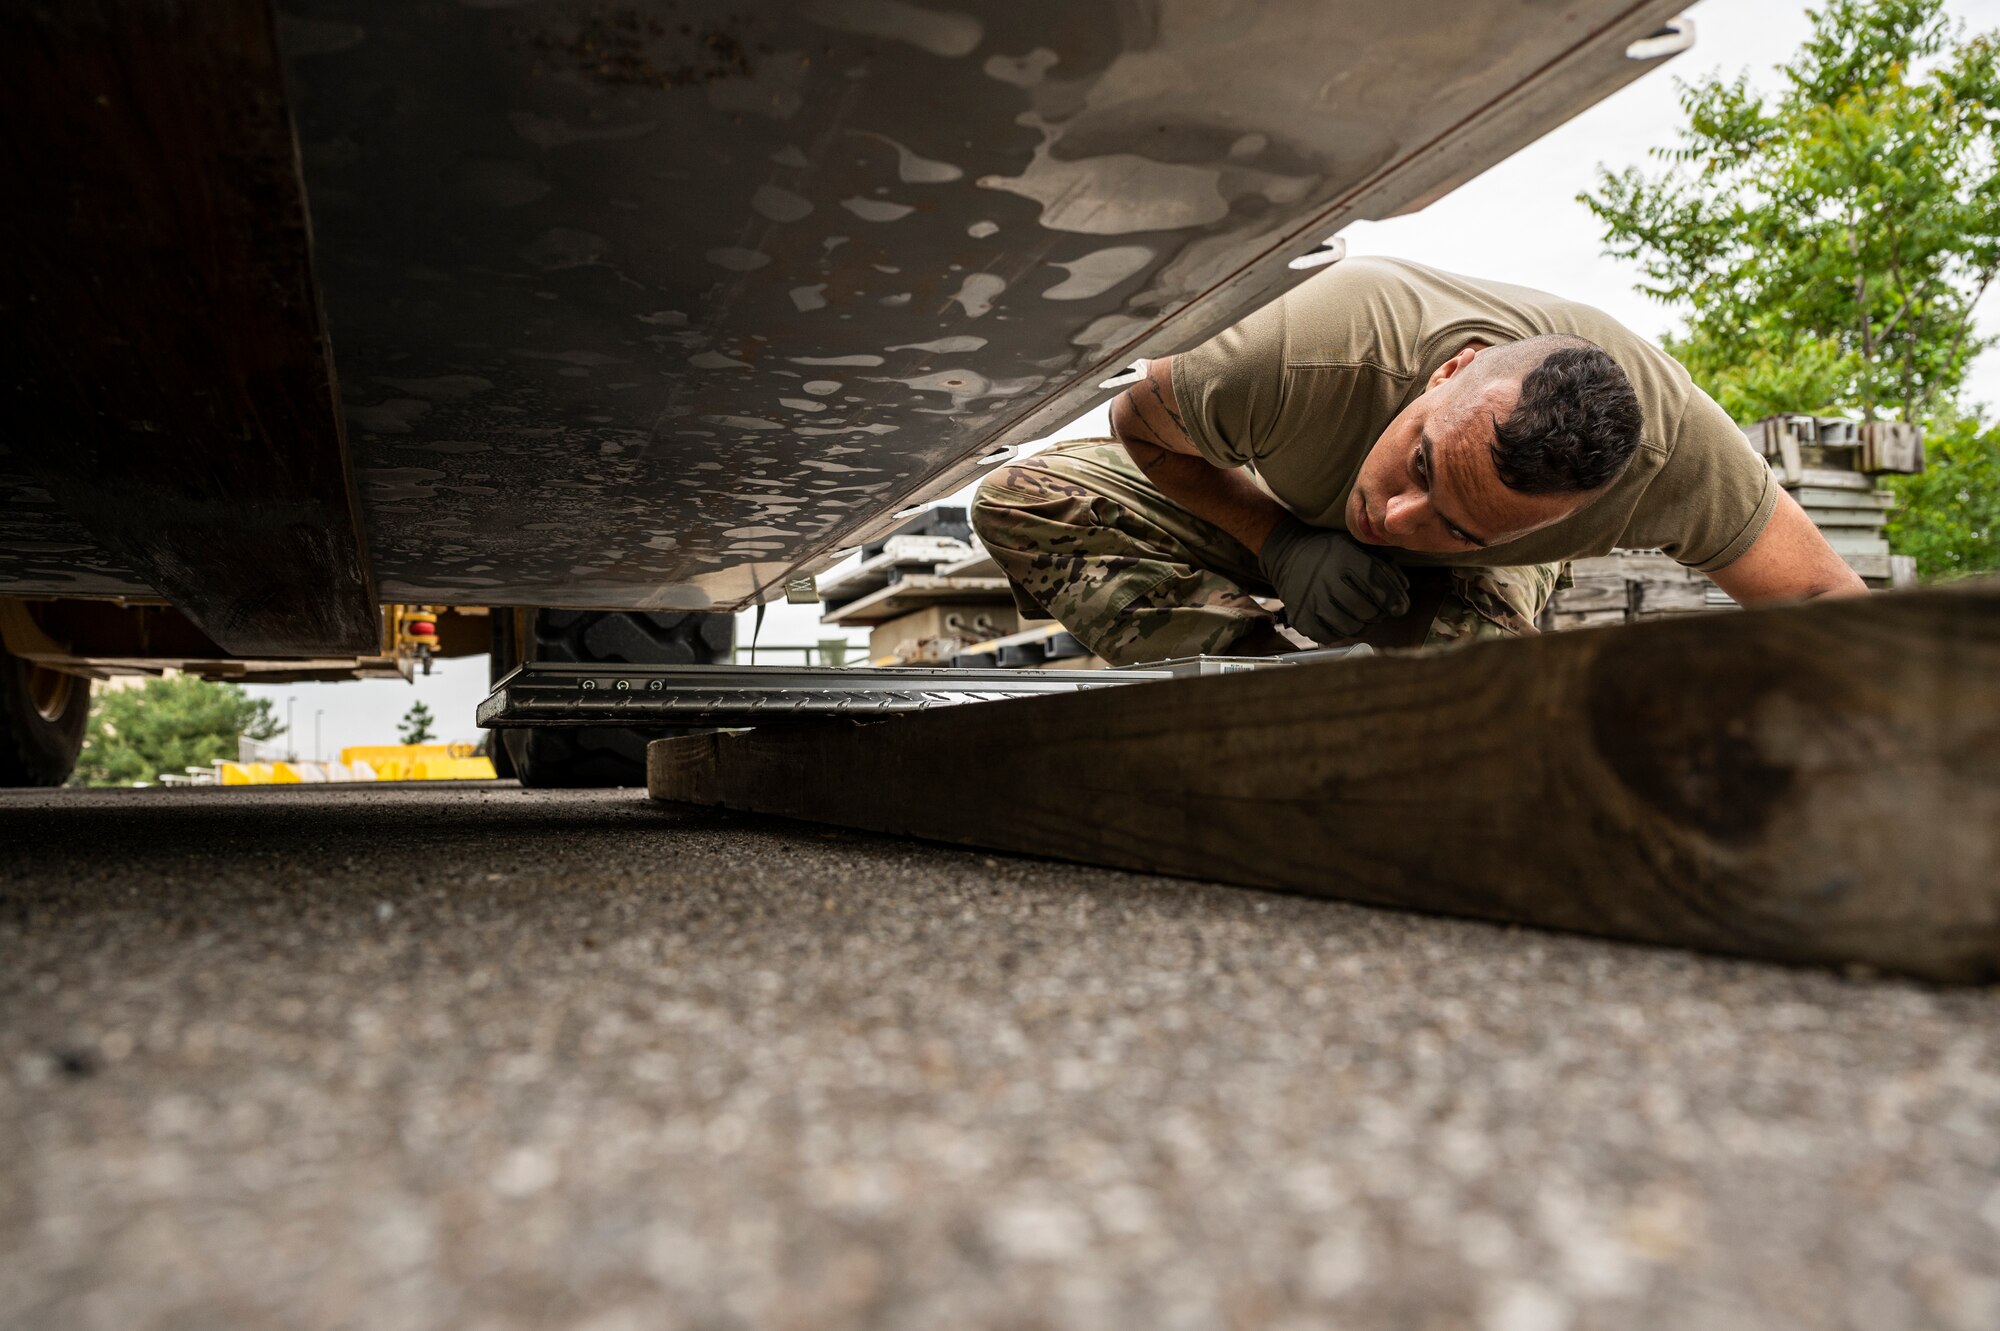 Senior Airman Zach Long, 32nd Aerial Port Squadron passenger services operations technician, checks the placement of a scale before weighing a pallet of cargo at the Pittsburgh International Airport Air Reserve Station, Pennsylvania, May 28, 2021.